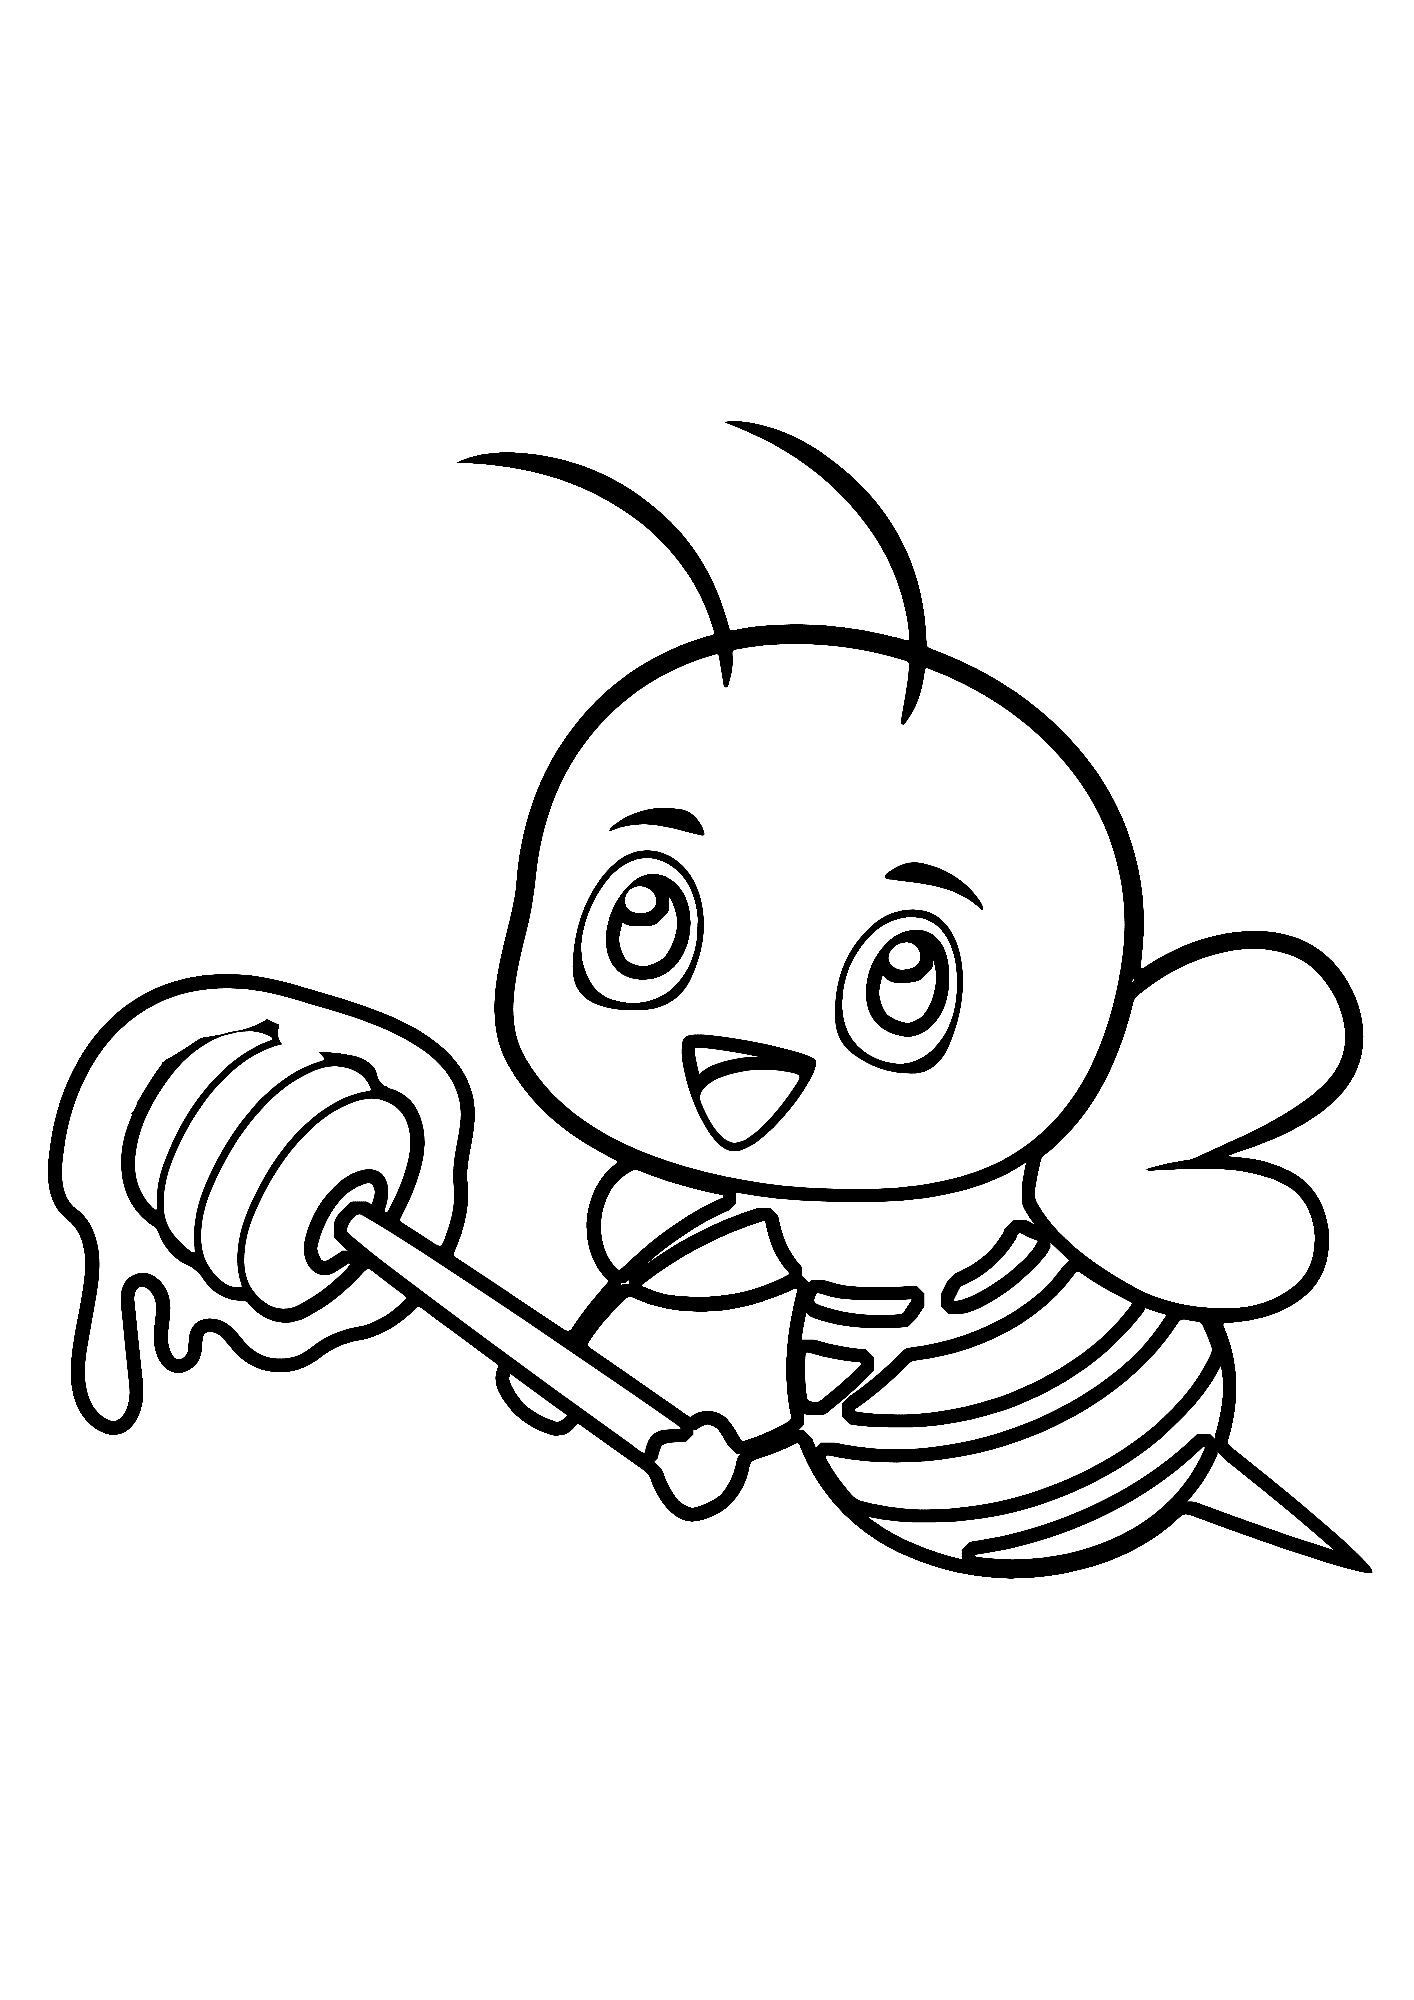 Sweet Bee Image For Kid Coloring Page